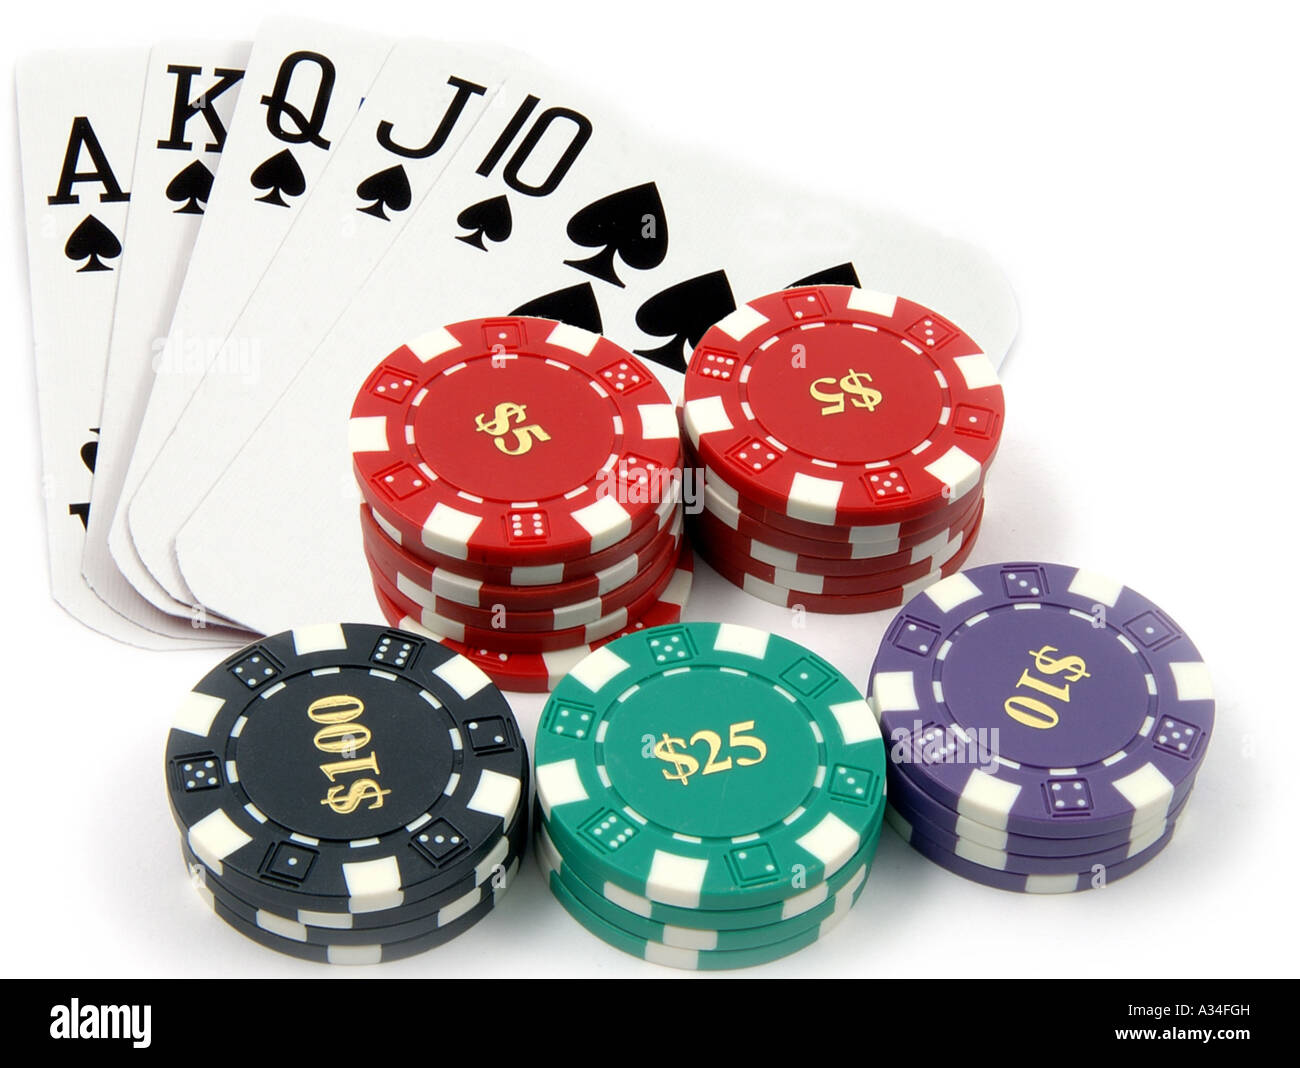 one of the highest poker hands, a Royal Flush of spades with a pile of poker  chips Stock Photo - Alamy